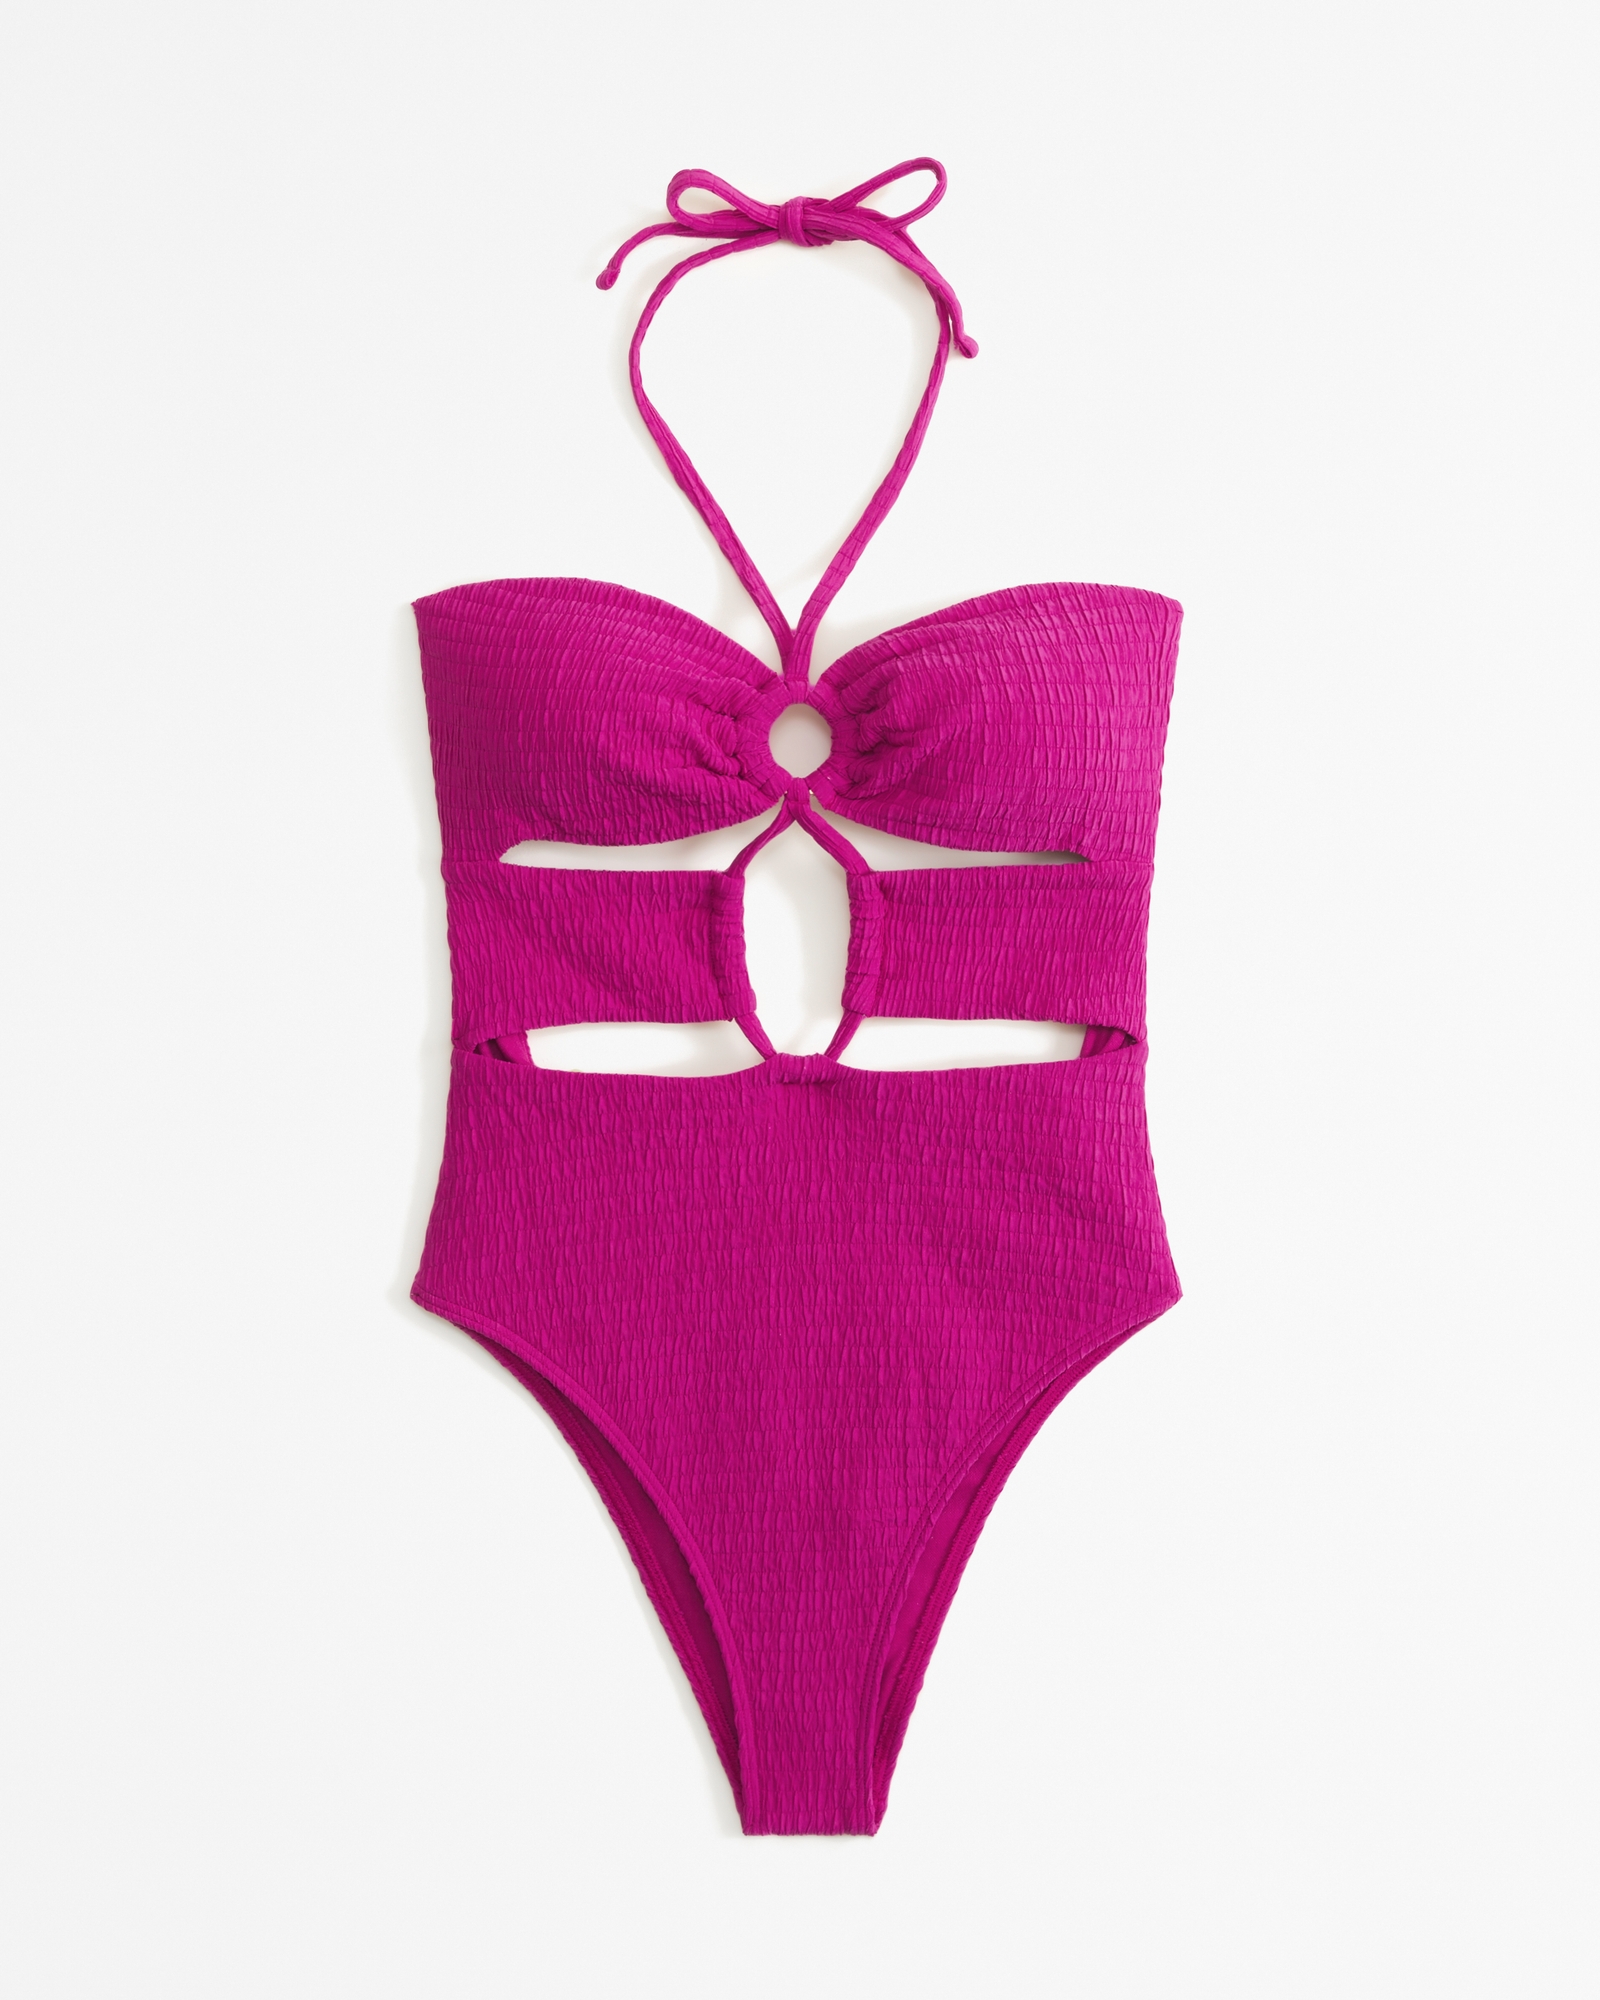 Women's Halter O-Ring One-Piece Swimsuit